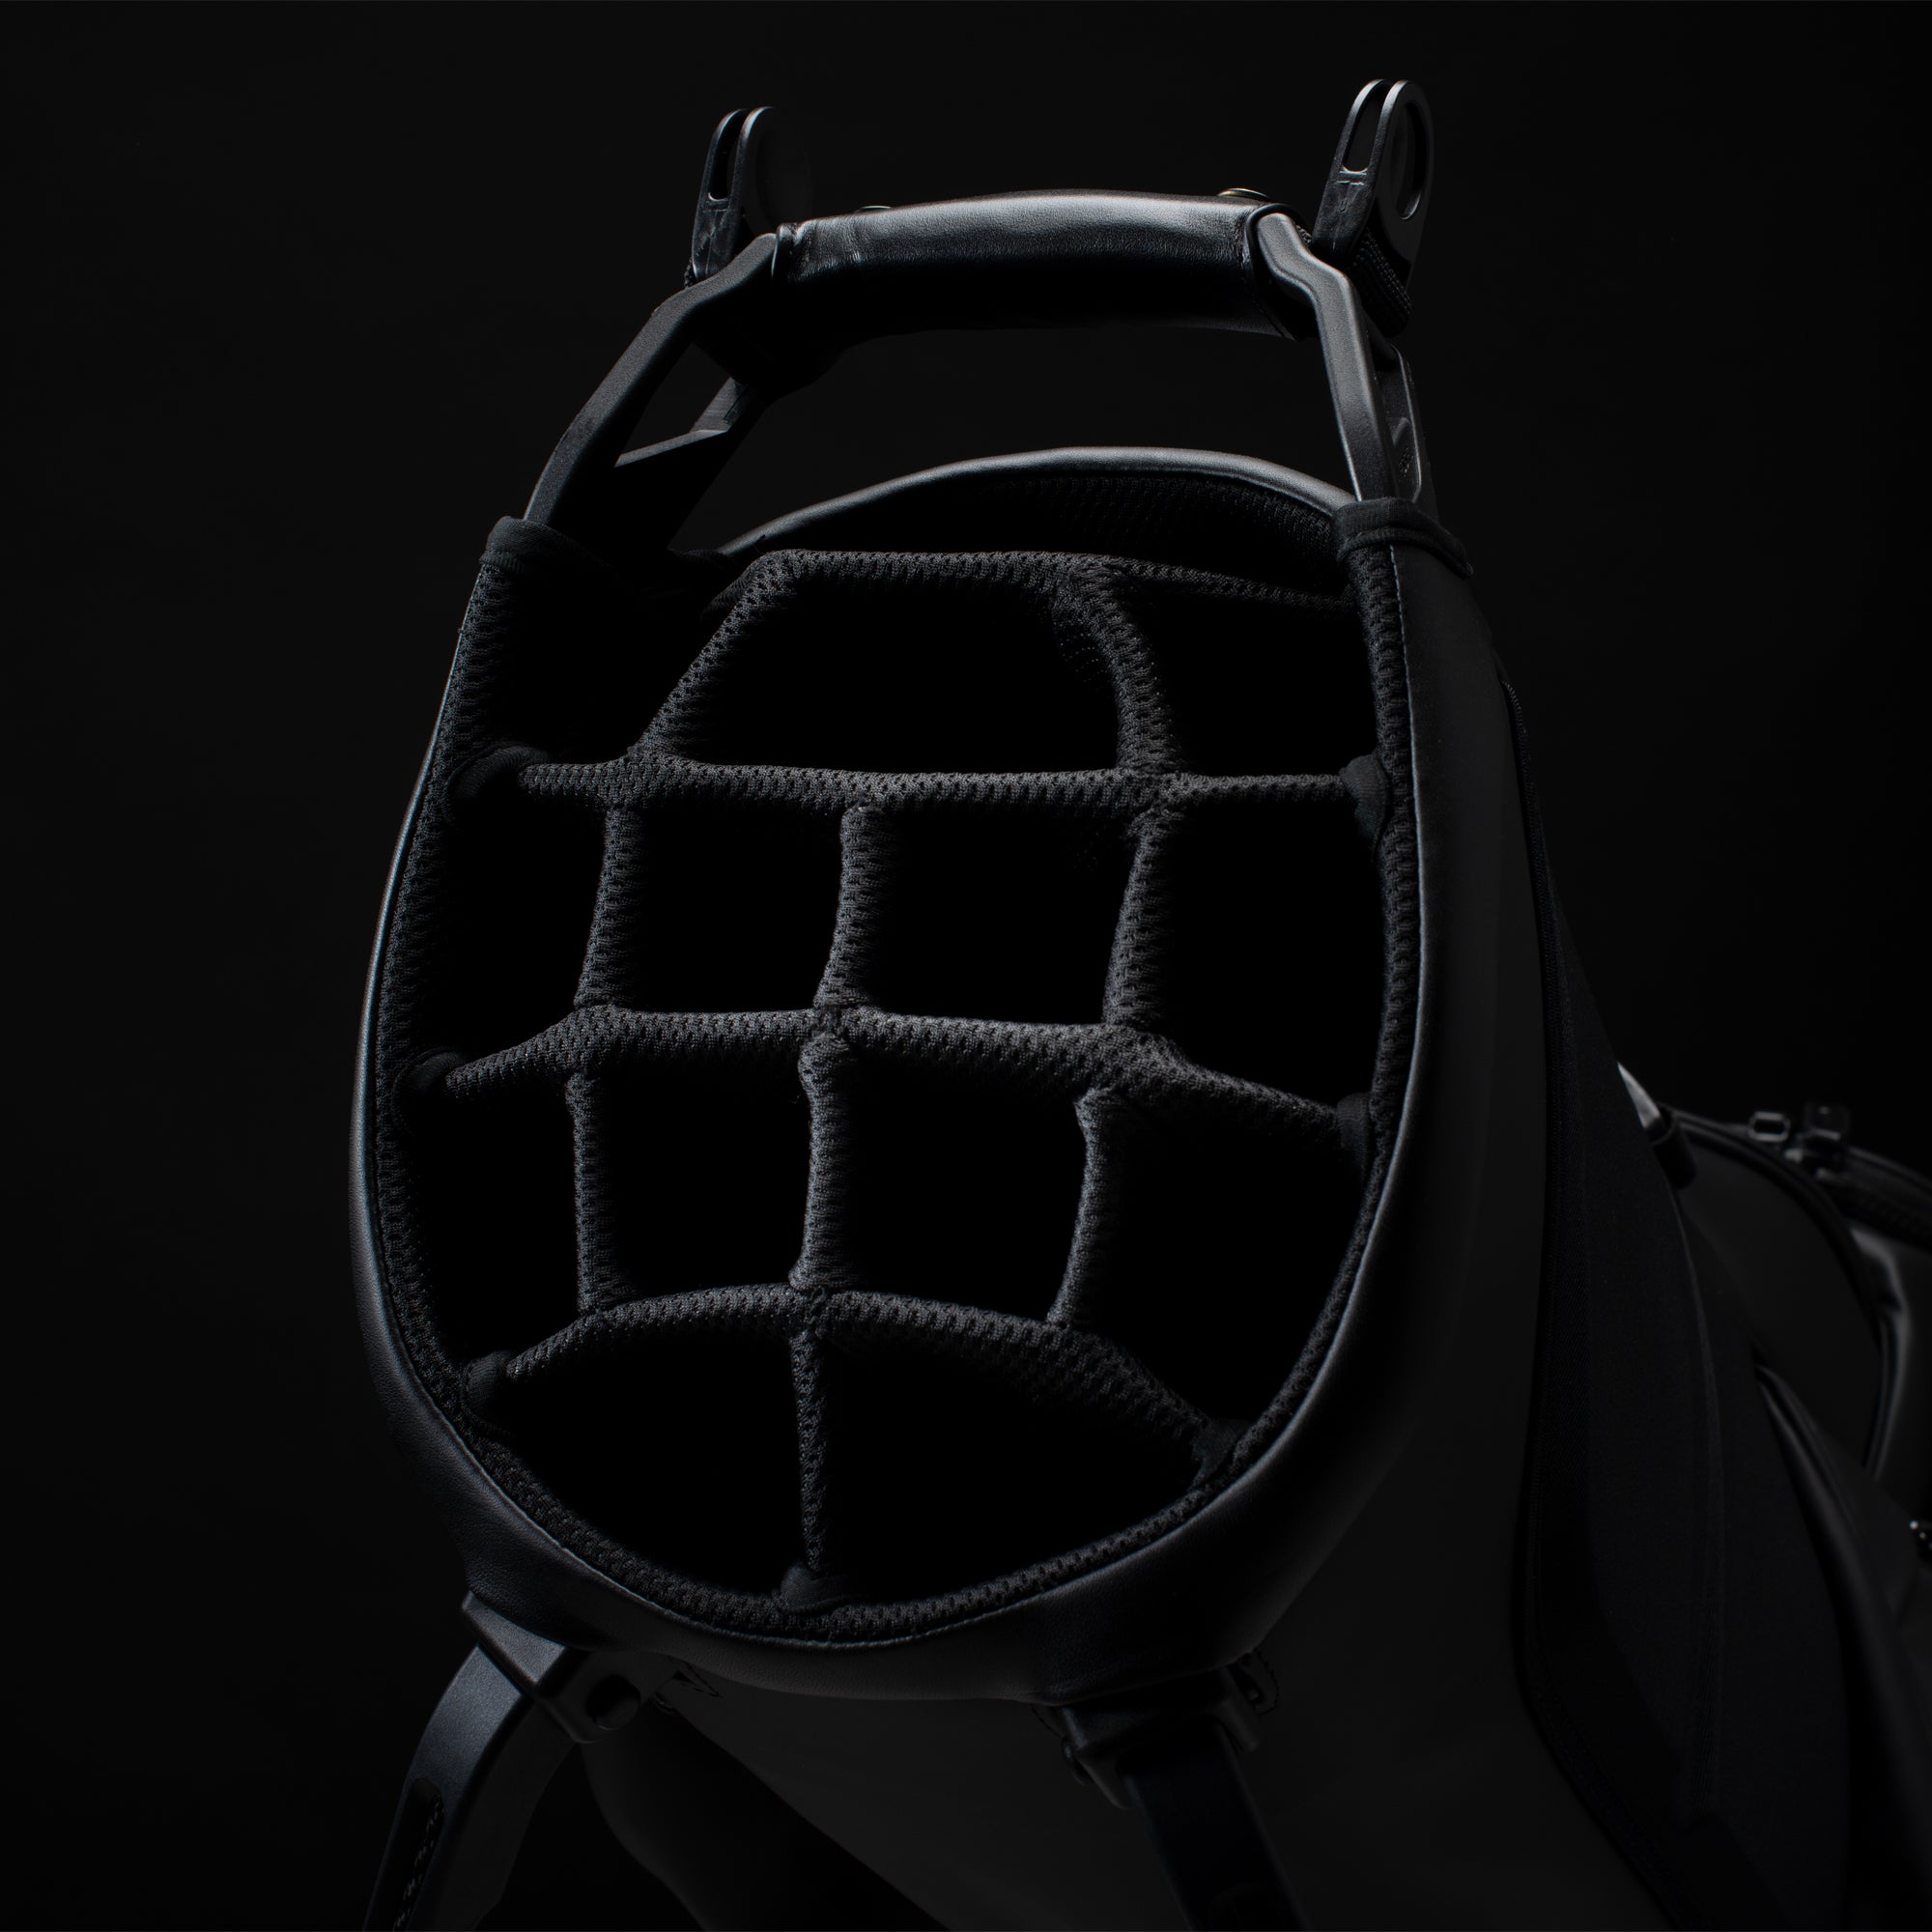 Close up image of the 14-way divider layout in a black golf bag in a black studio